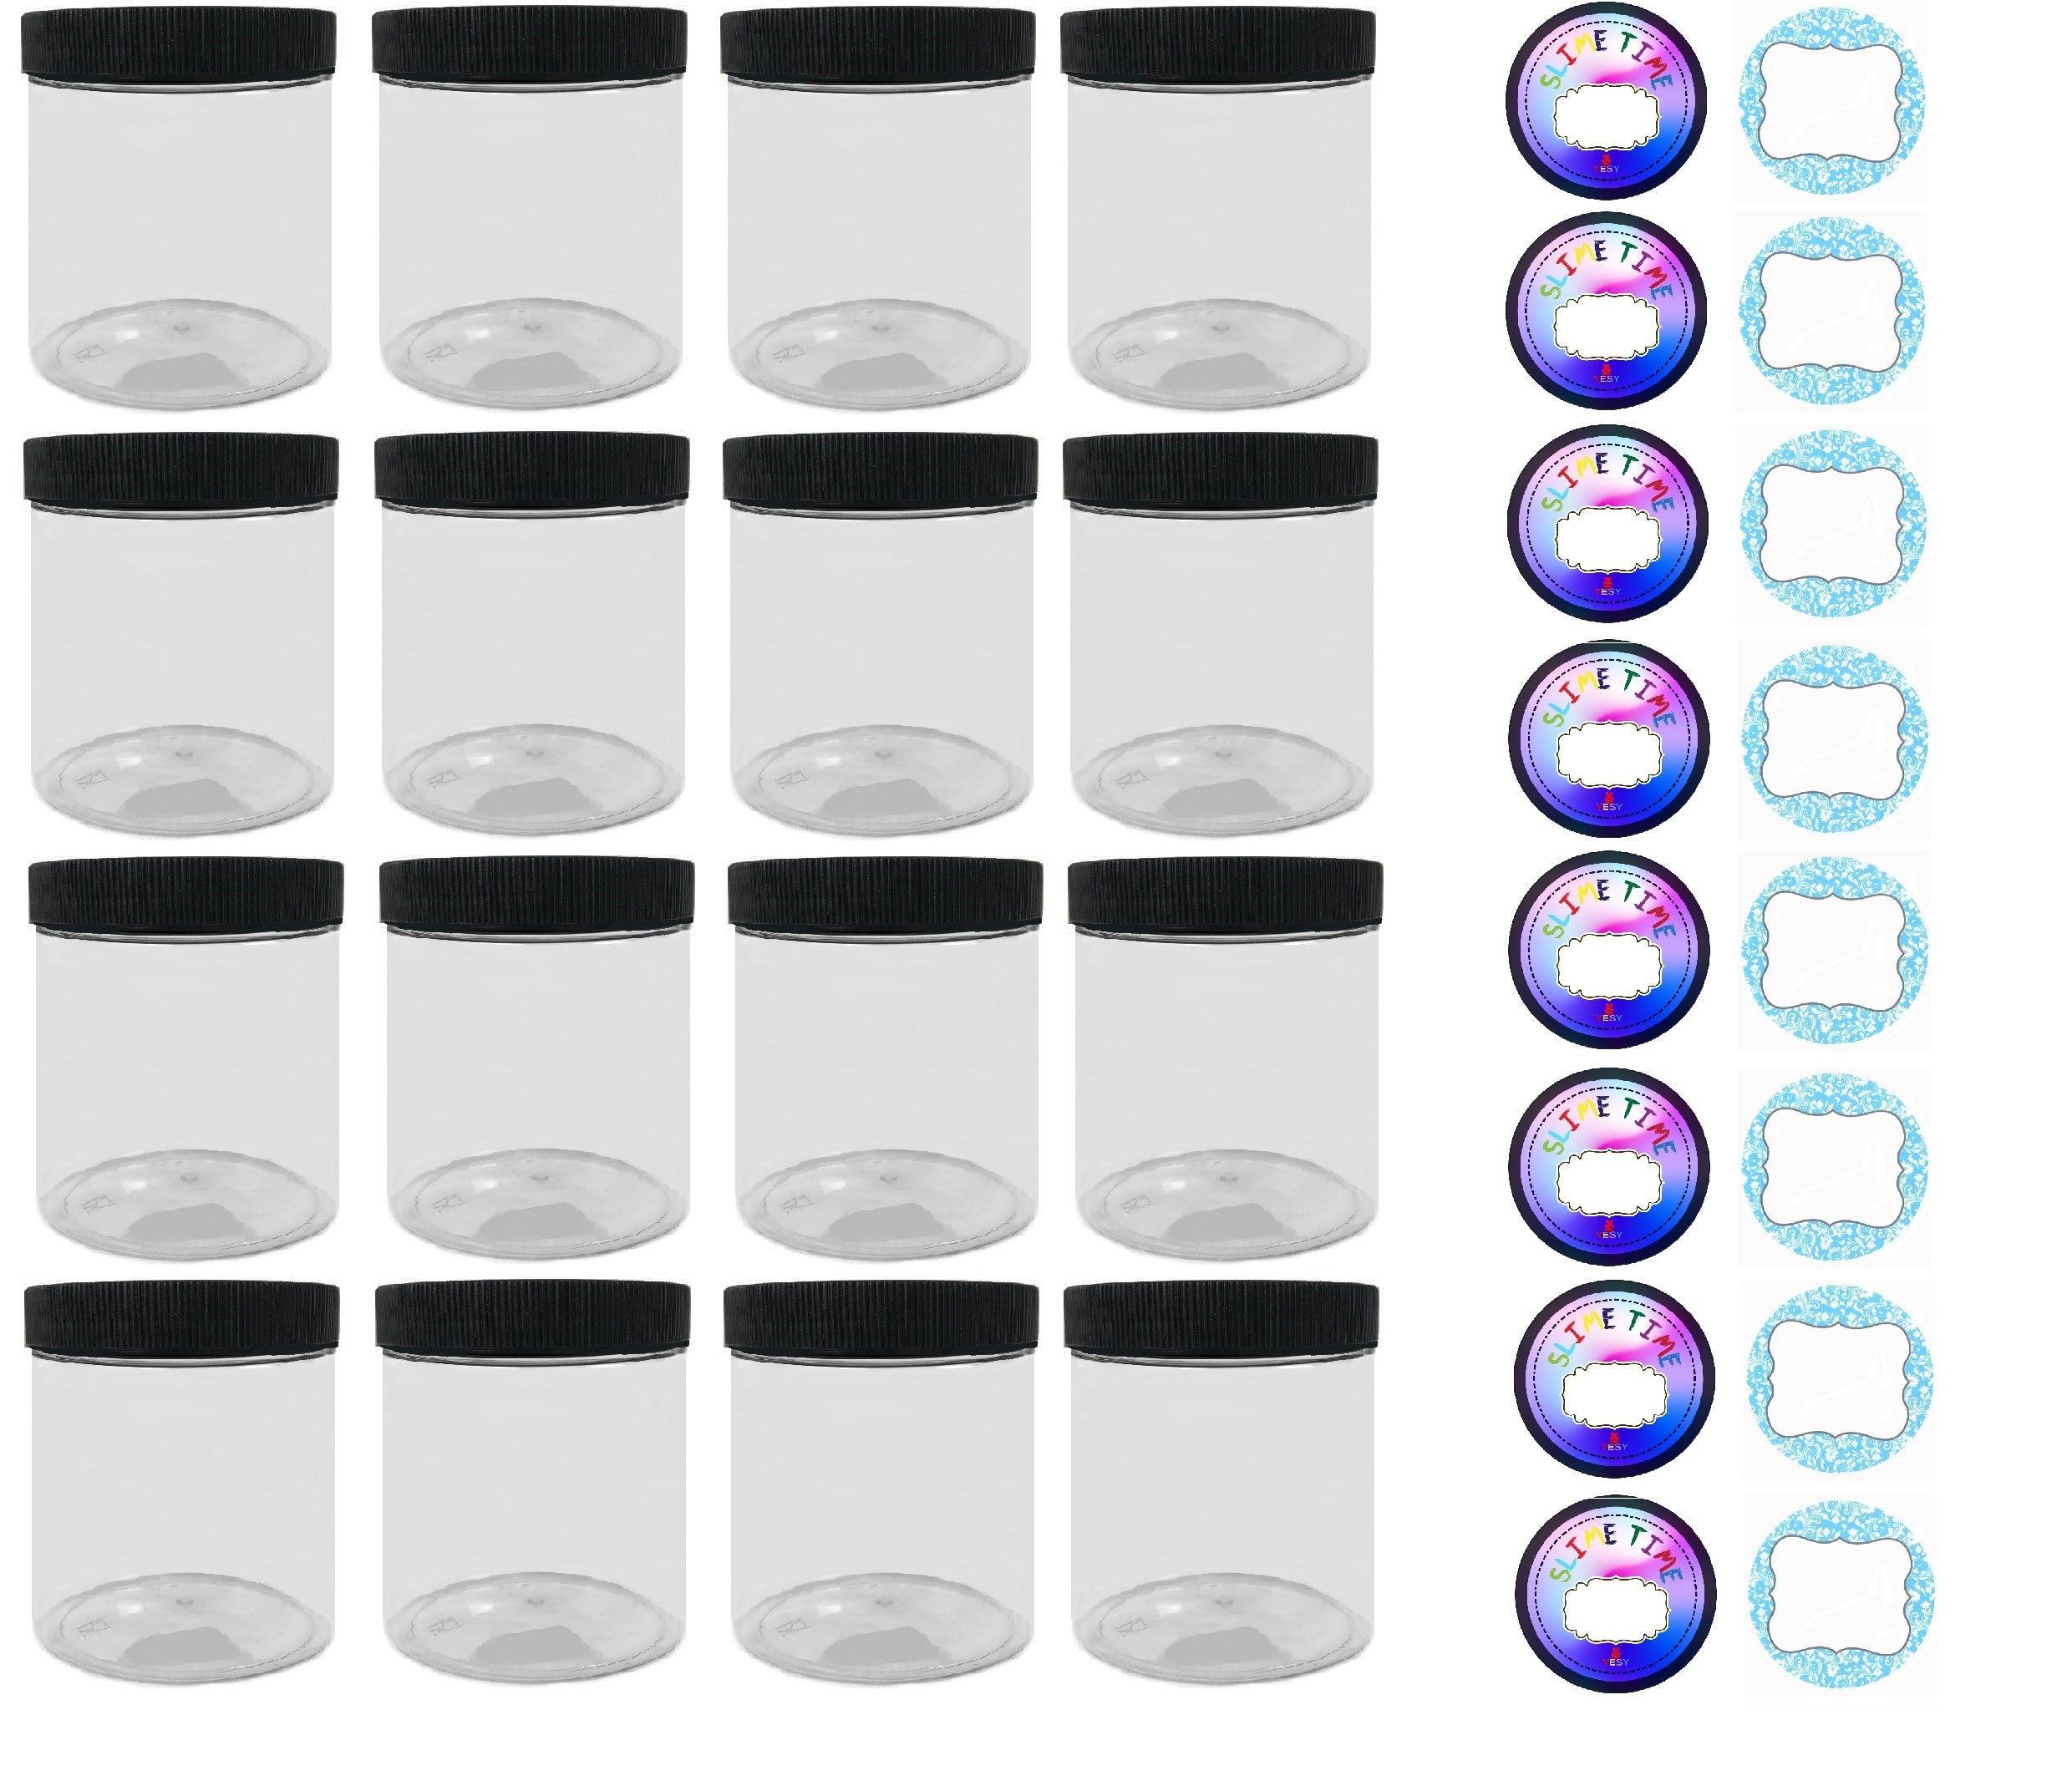 16 Pack 4oz(120ml) Slime Storage Favor Jars Clear Empty Wide-Mouth Plastic  containers with Clear lids for DIY Slime Making - 2.6x1.65 